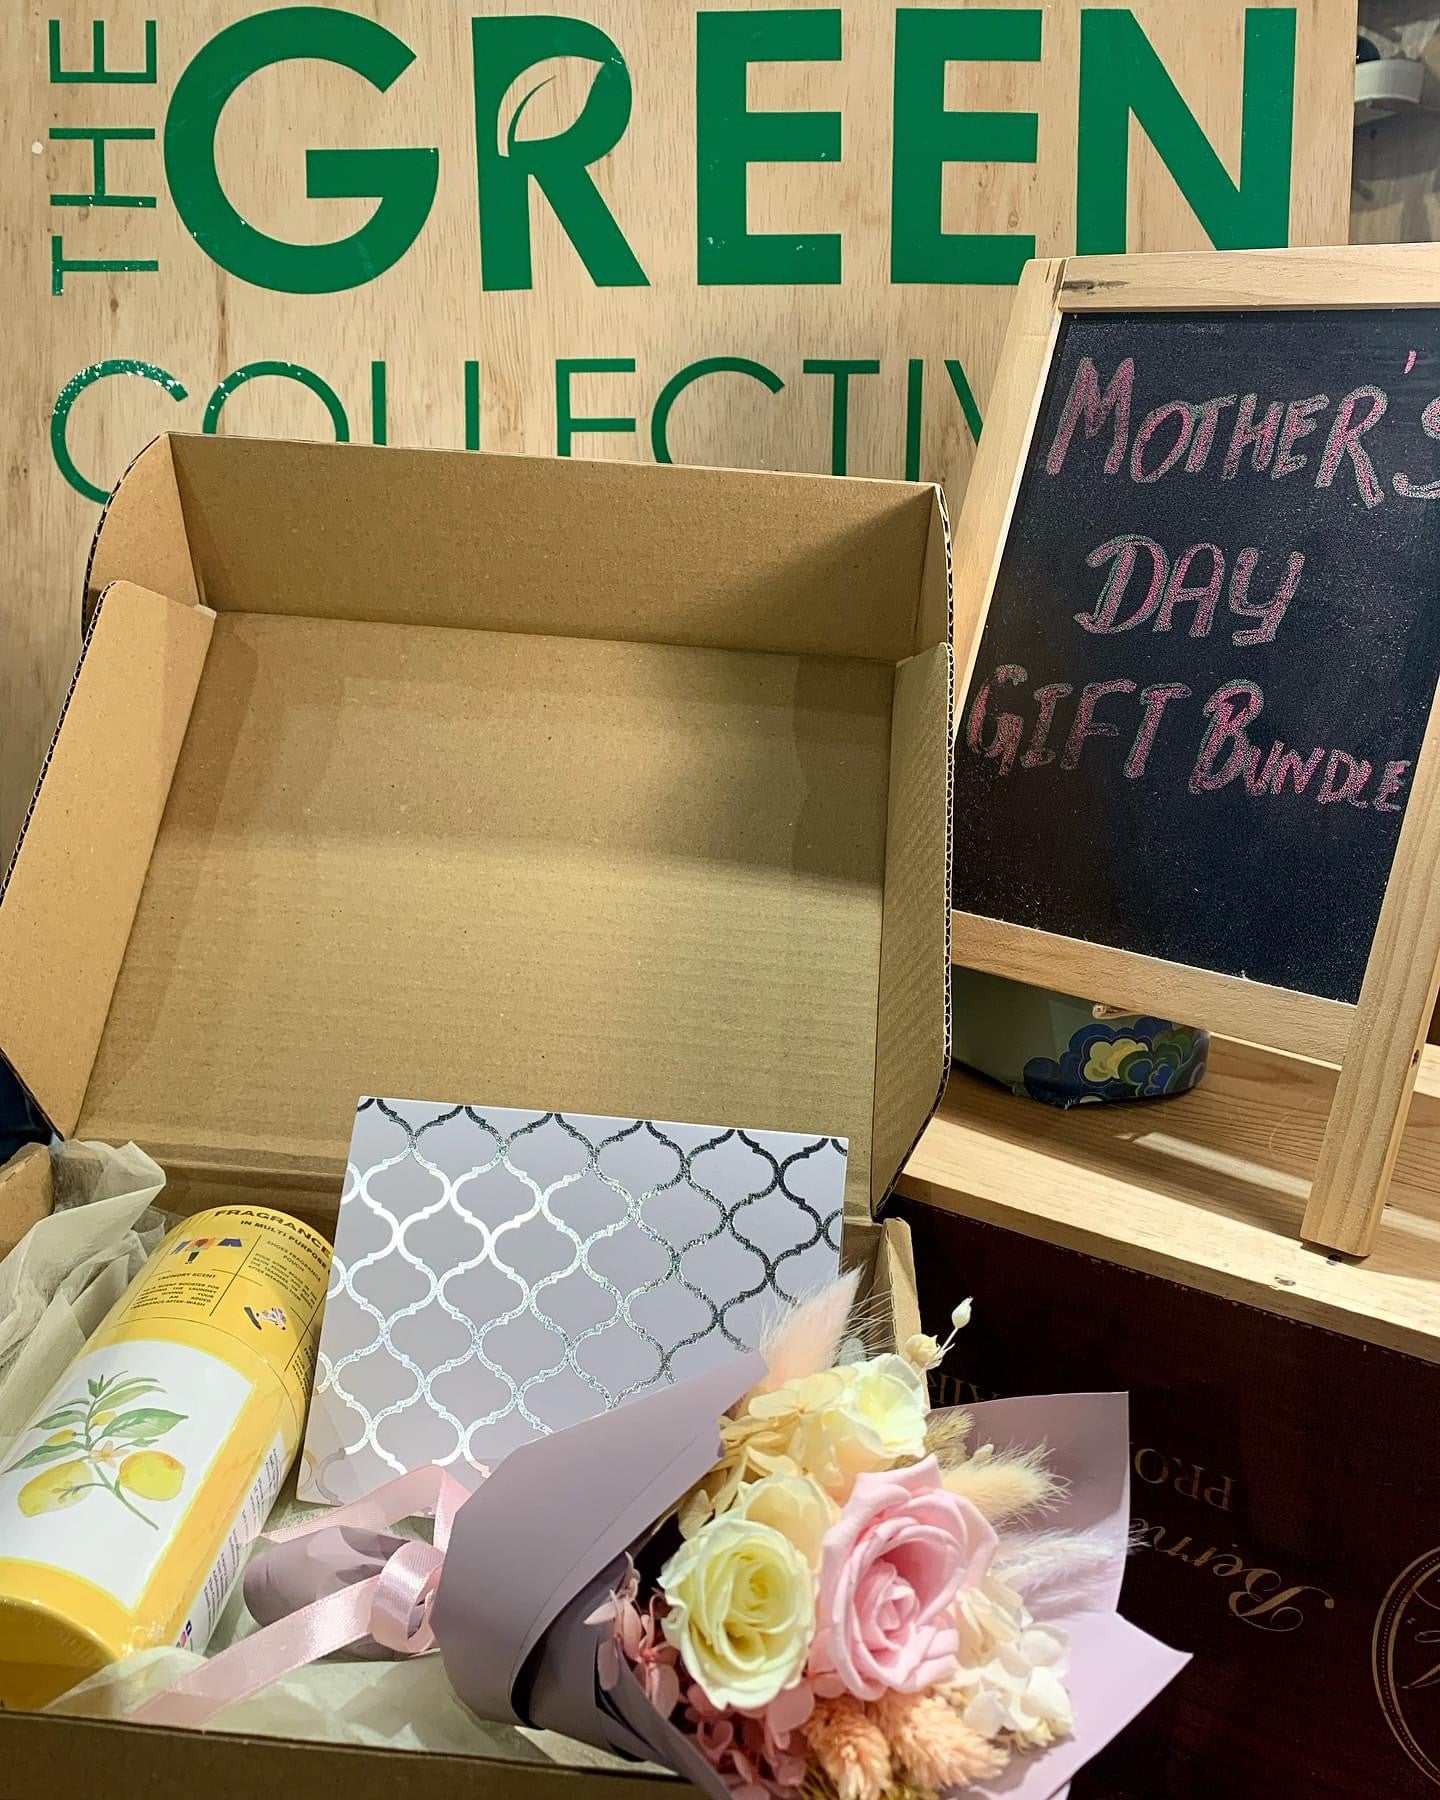 You are my sunshine - Mothers' day gift box